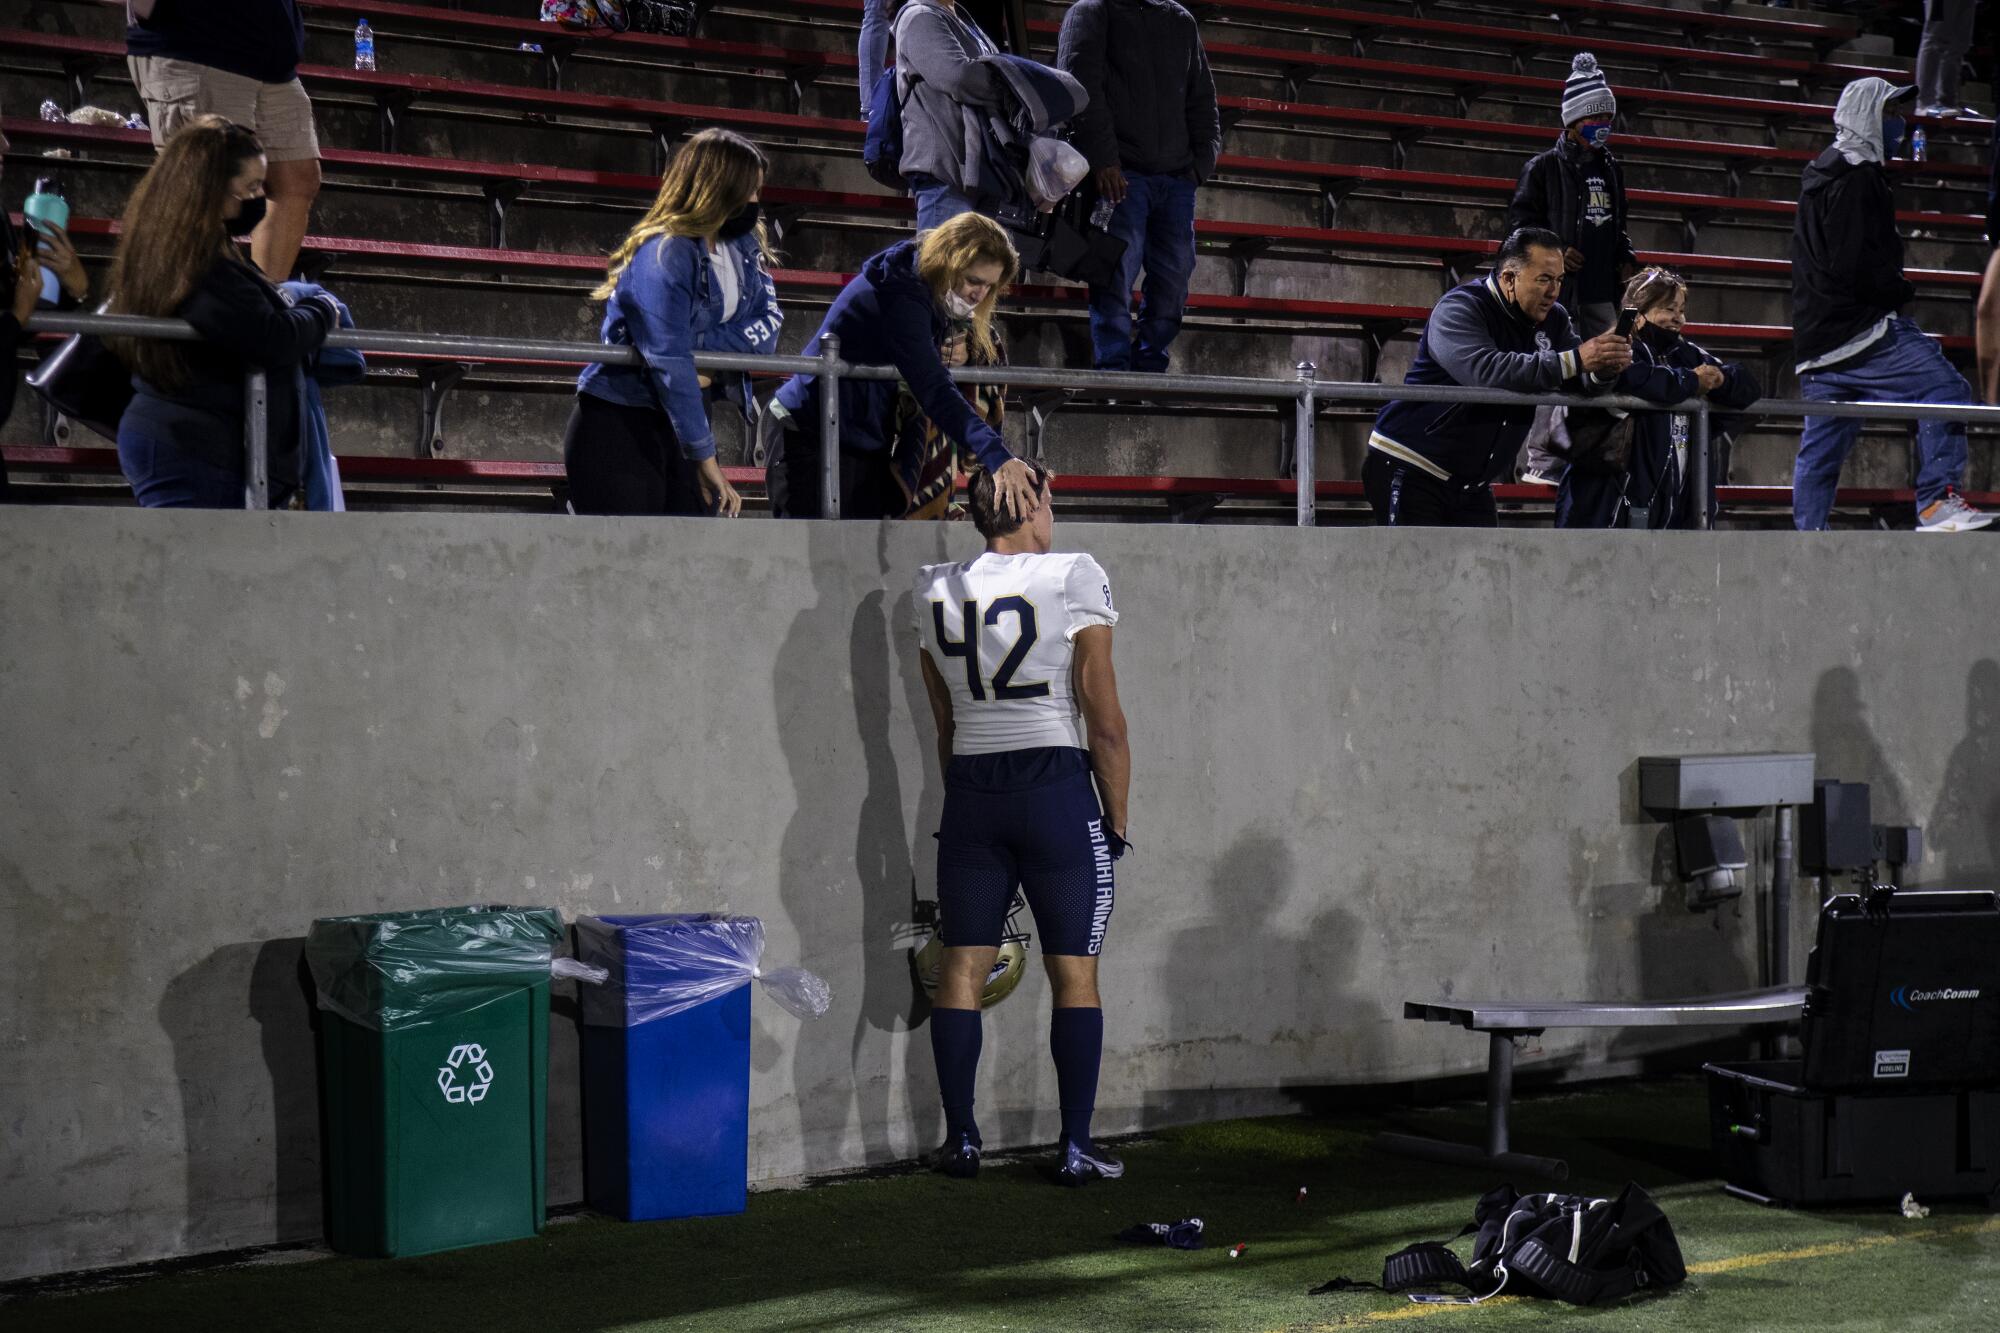 St. John Bosco senior linebacker Robby Vaughn stands beneath a woman in the stands who has her hand on his head..